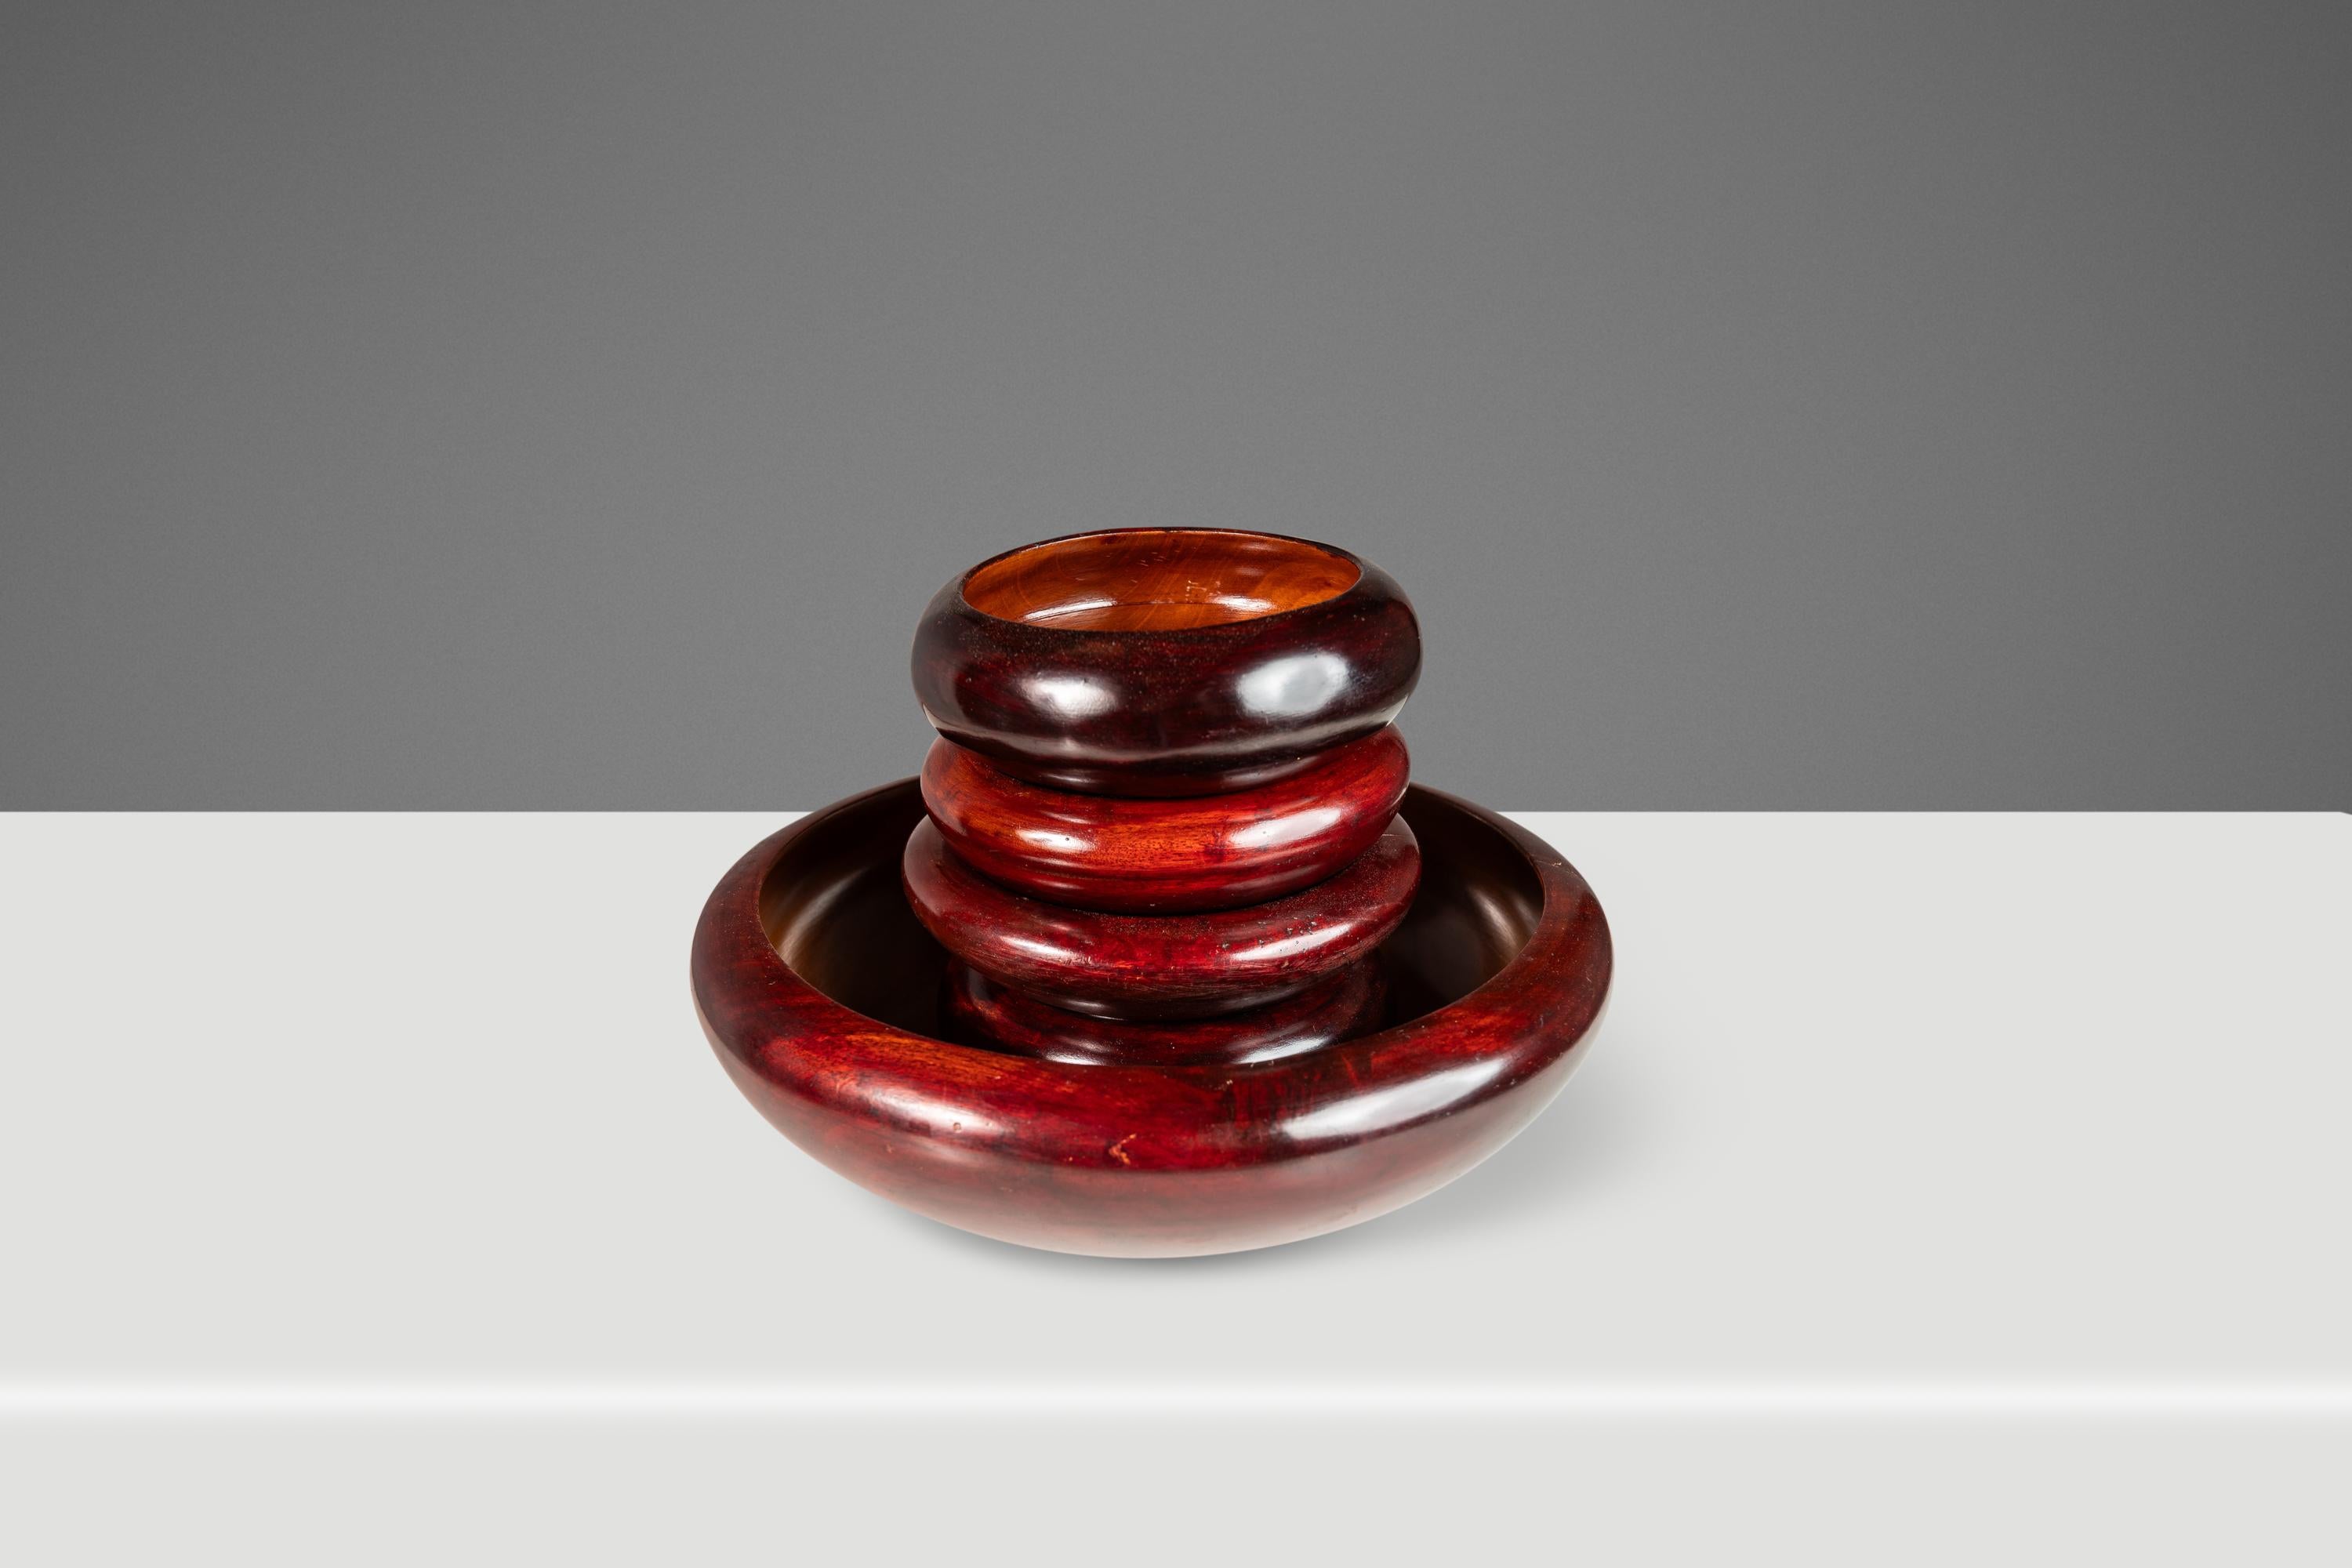 Introducing a gorgeous, hand-turned and hand-polished set of serving bowls carved from solid cherry wood. Featuring stunning woodgrains inside and out and each with their own unique shape and characteristics this serving set if perfect for